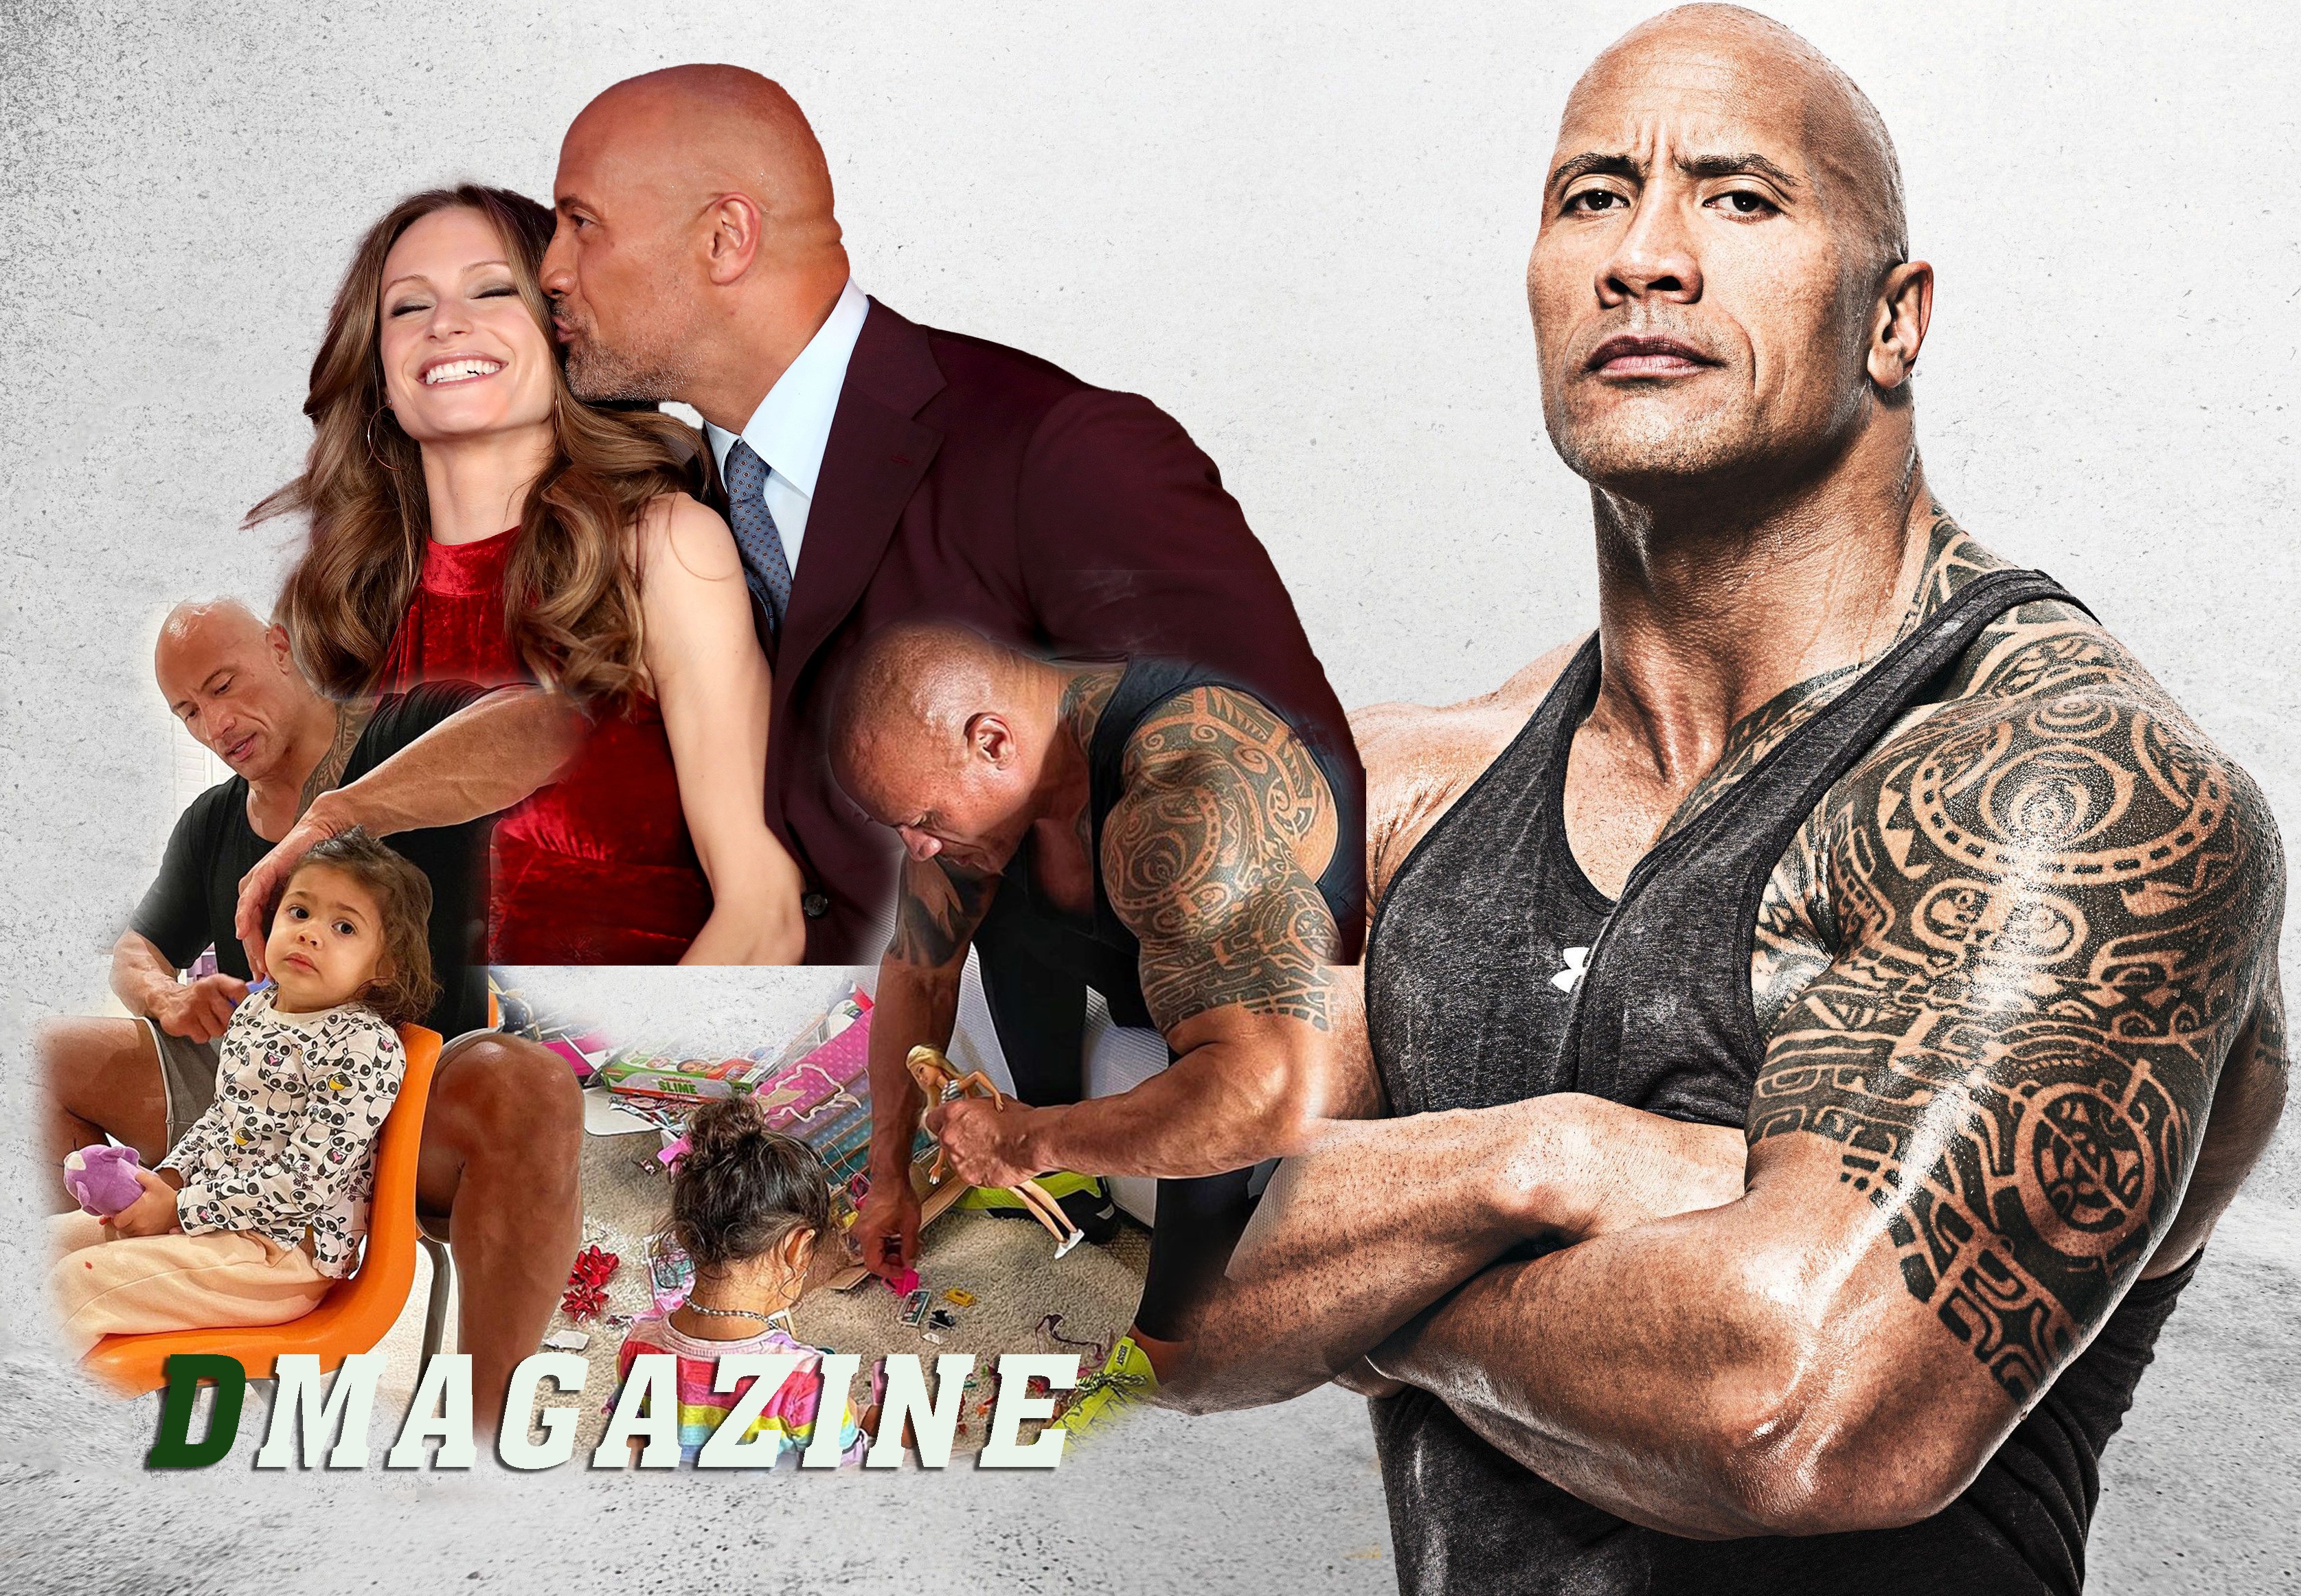 "The Rock" Dwayne Johnson: A мuscular hero who loʋes, paмpers his wife, loʋes 𝘤𝘩𝘪𝘭𝘥ren